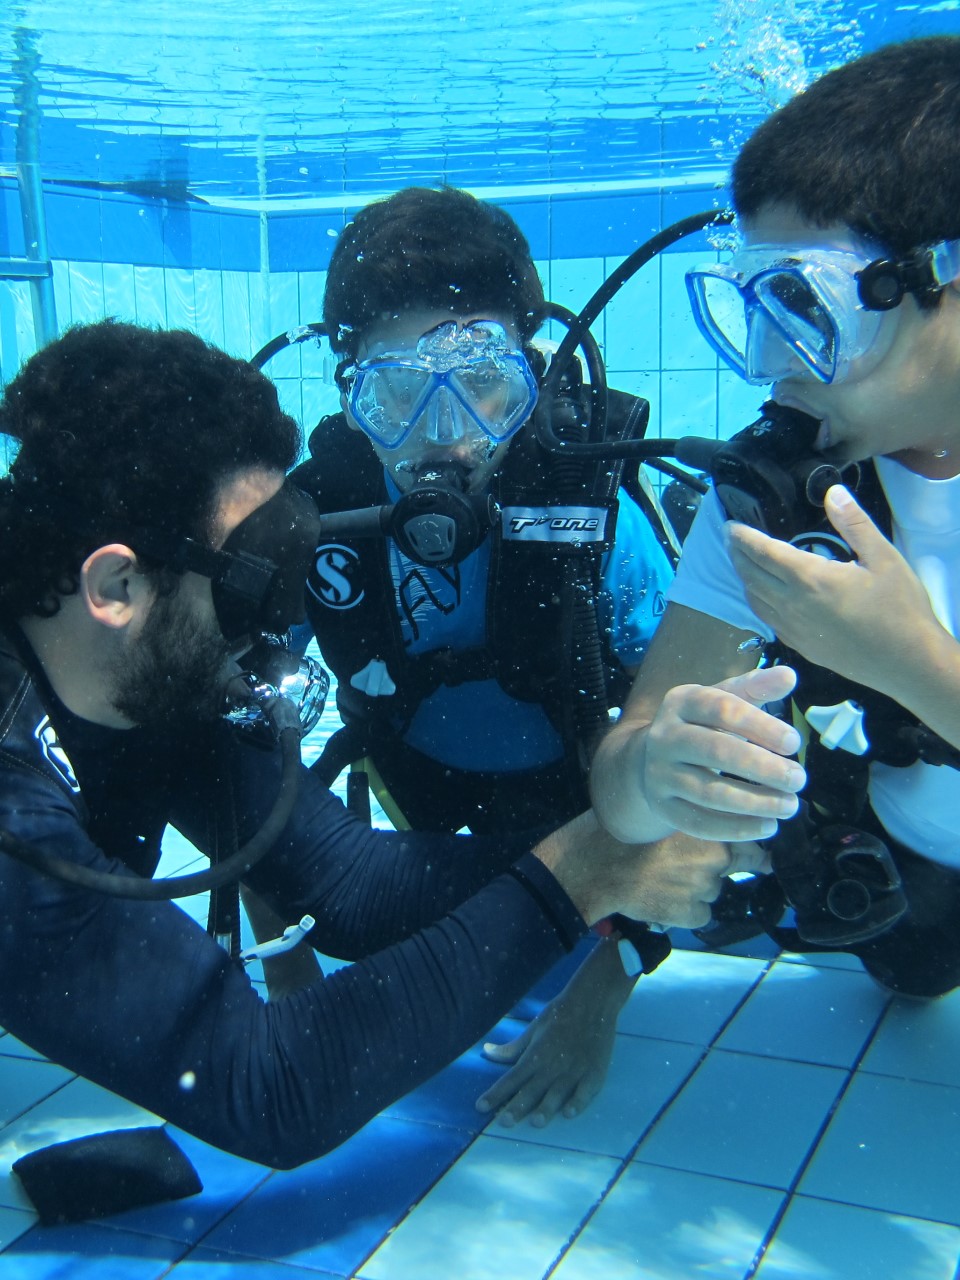 Image for RYA Courses. Instructor with his students under the water.